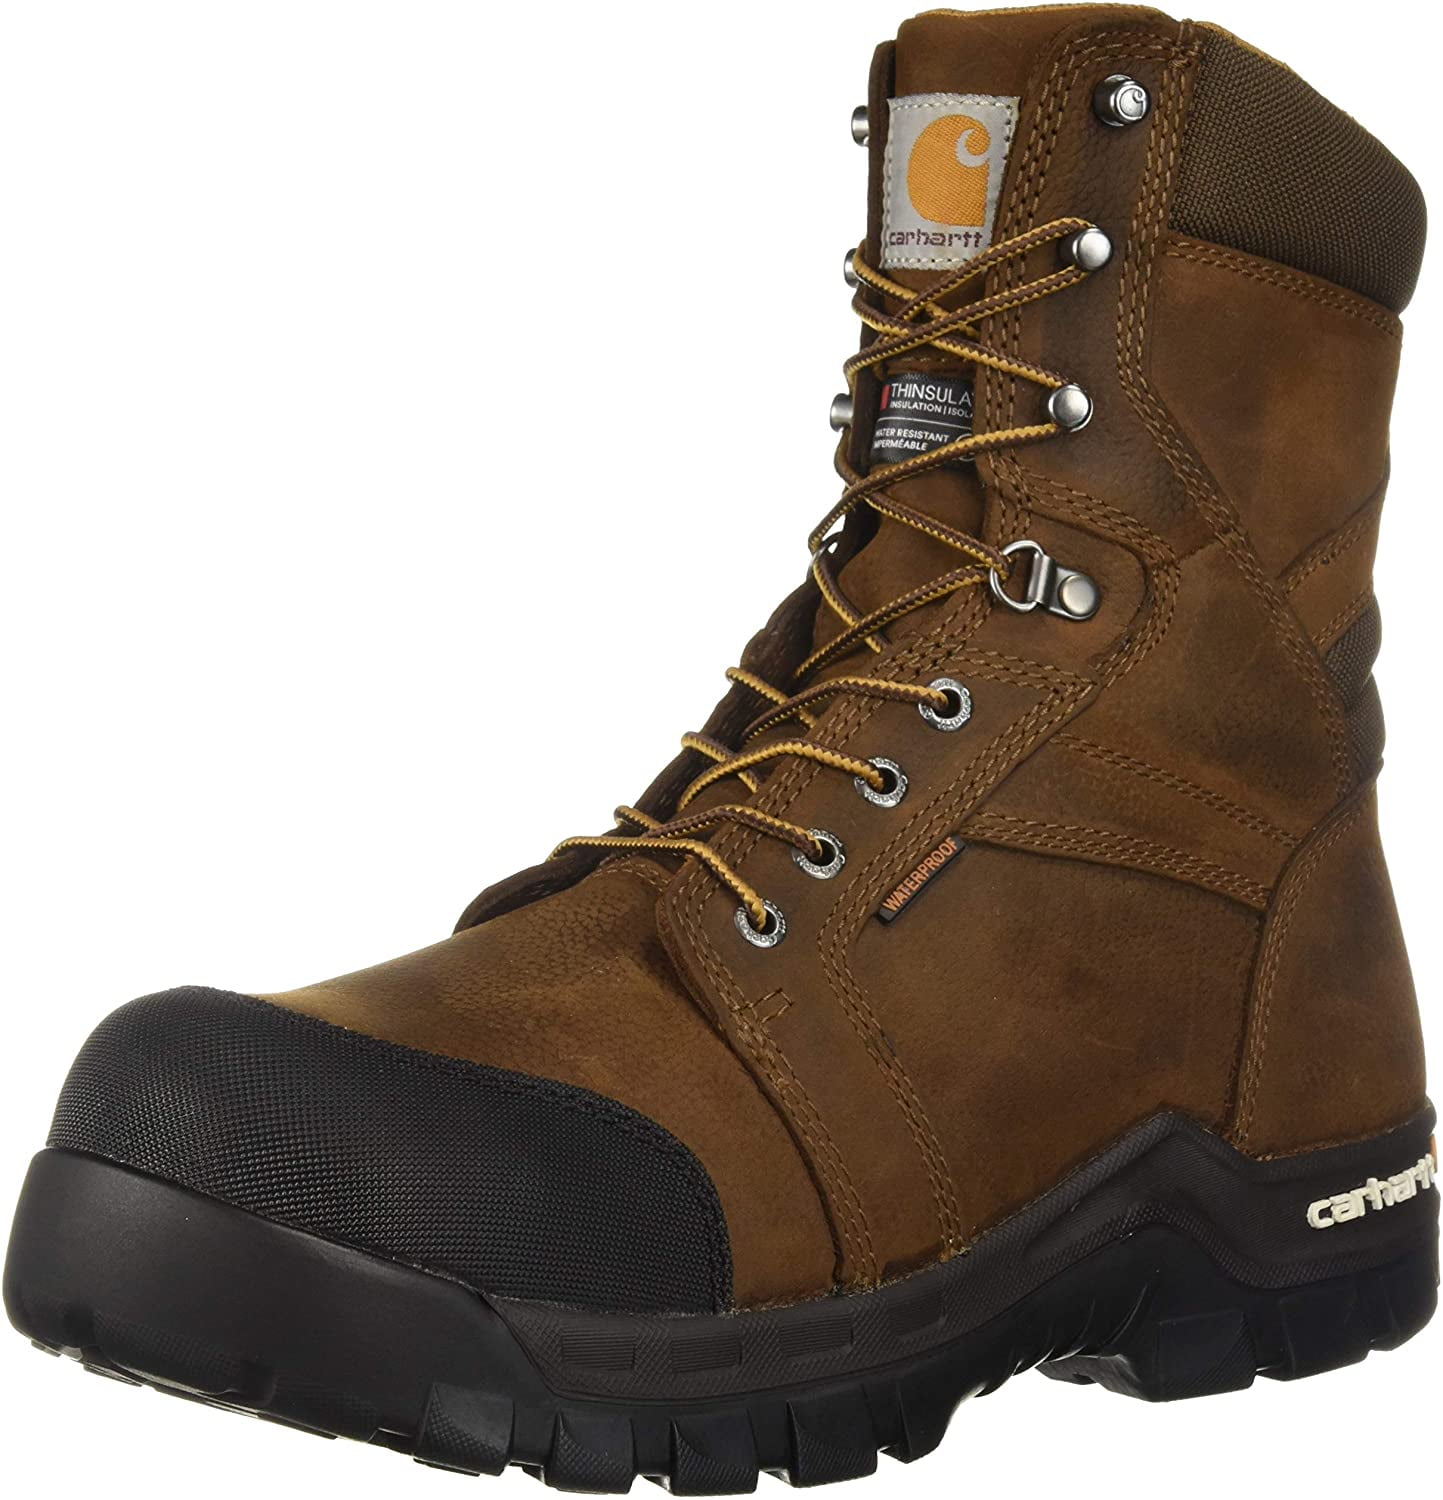 8 inch insulated work boots